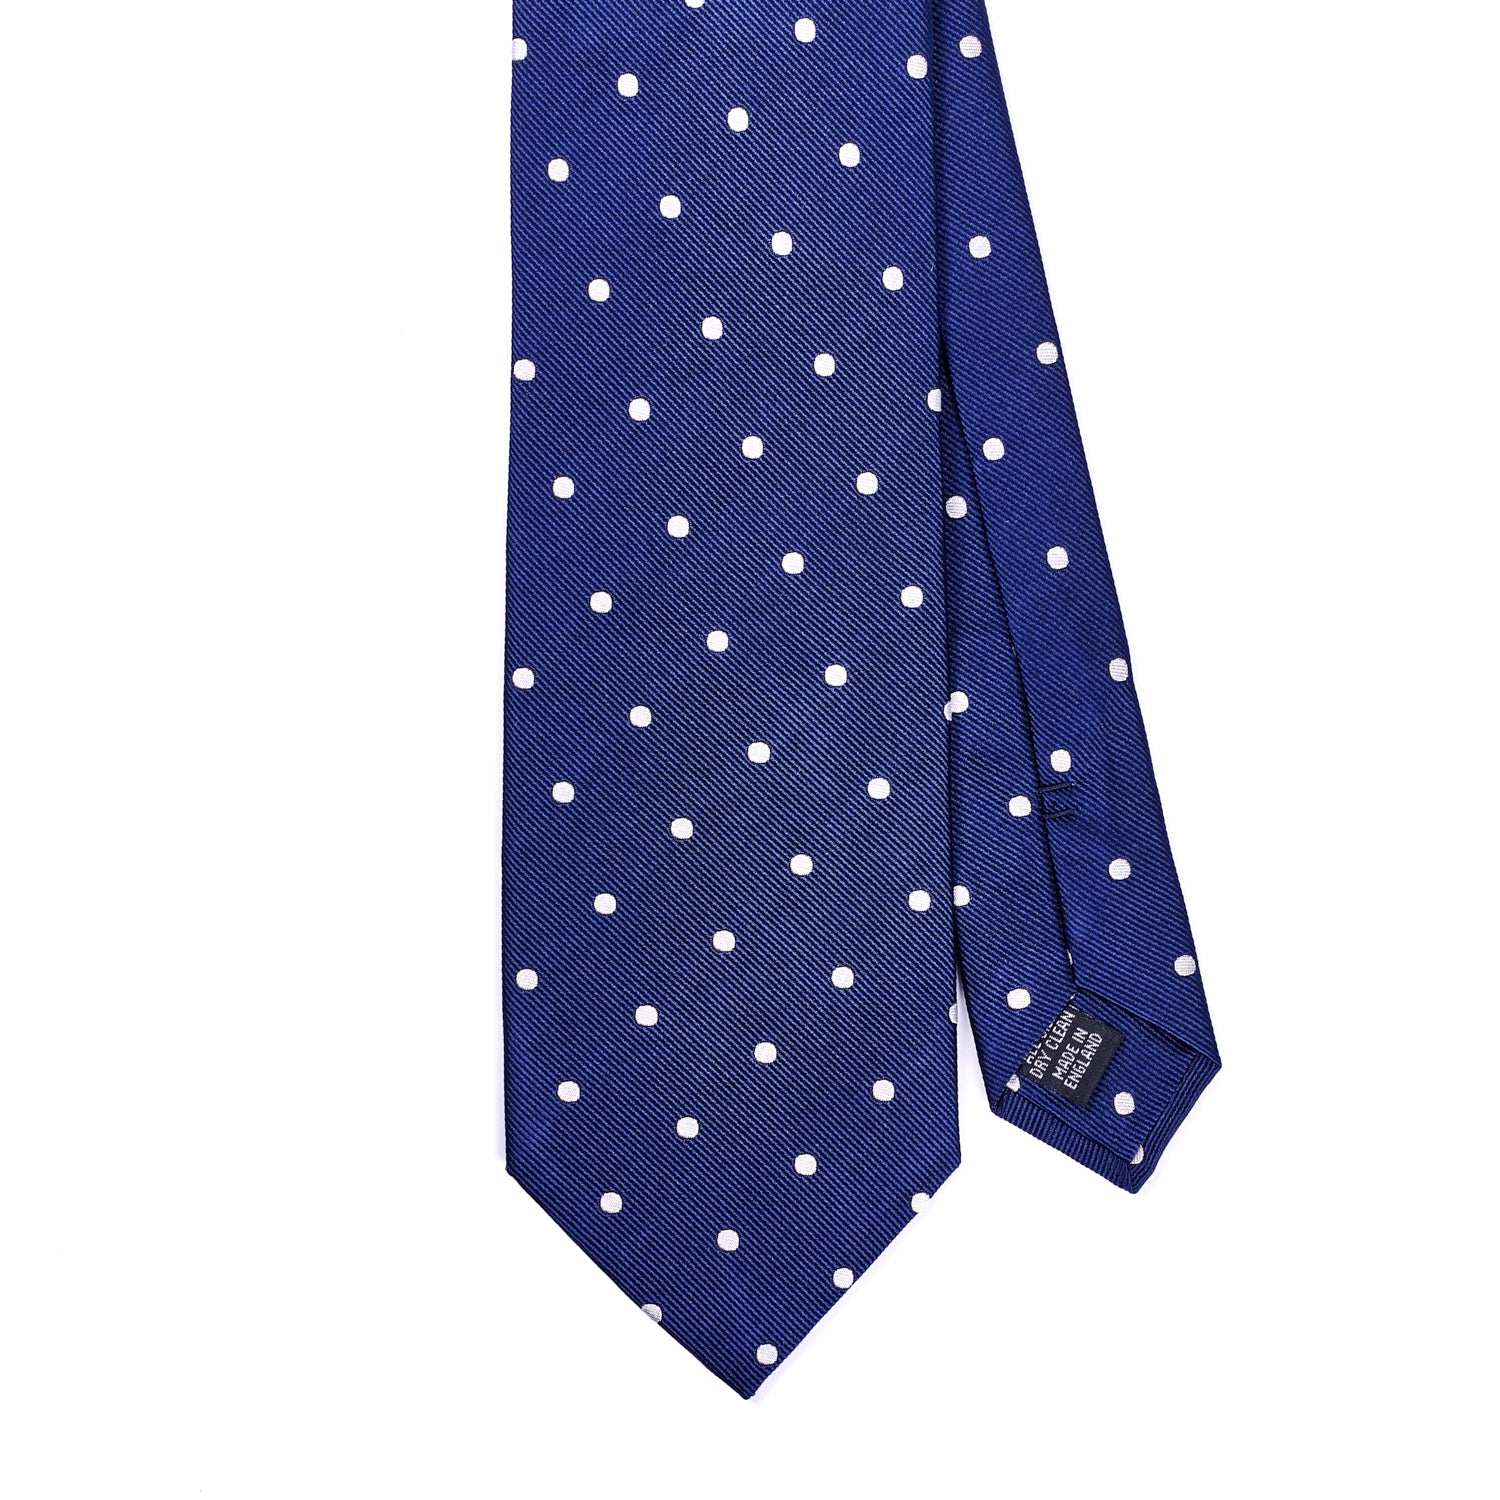 A blue and white polka dot KirbyAllison.com Sovereign Grade Woven Navy/White Wide Dot Tie on a white background, handmade in the United Kingdom.